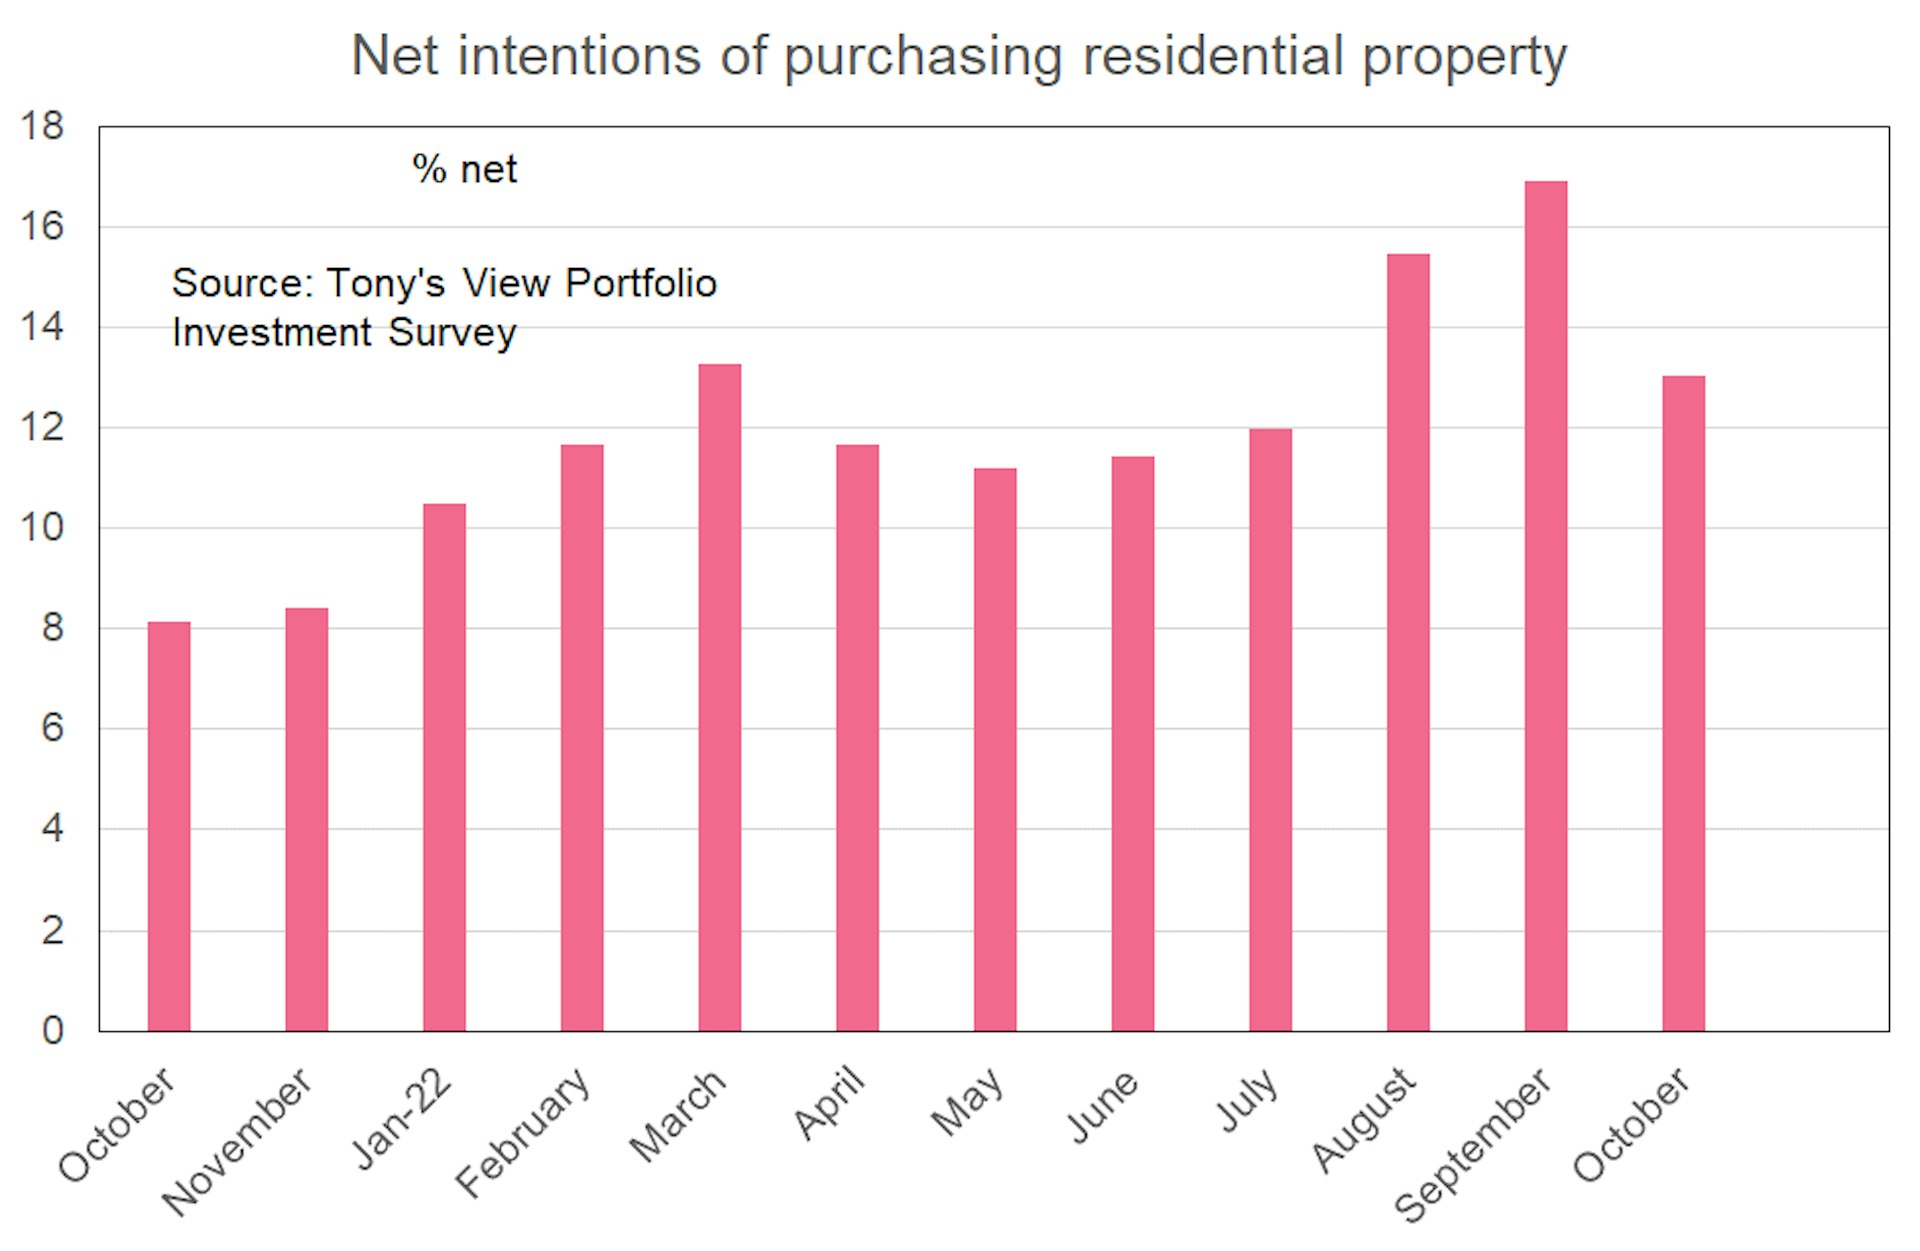 Bar graph showing net intentions of purchasing residential property falling sharply from 17% of respondents in September 2022 to 13% of respondents in October 2022.